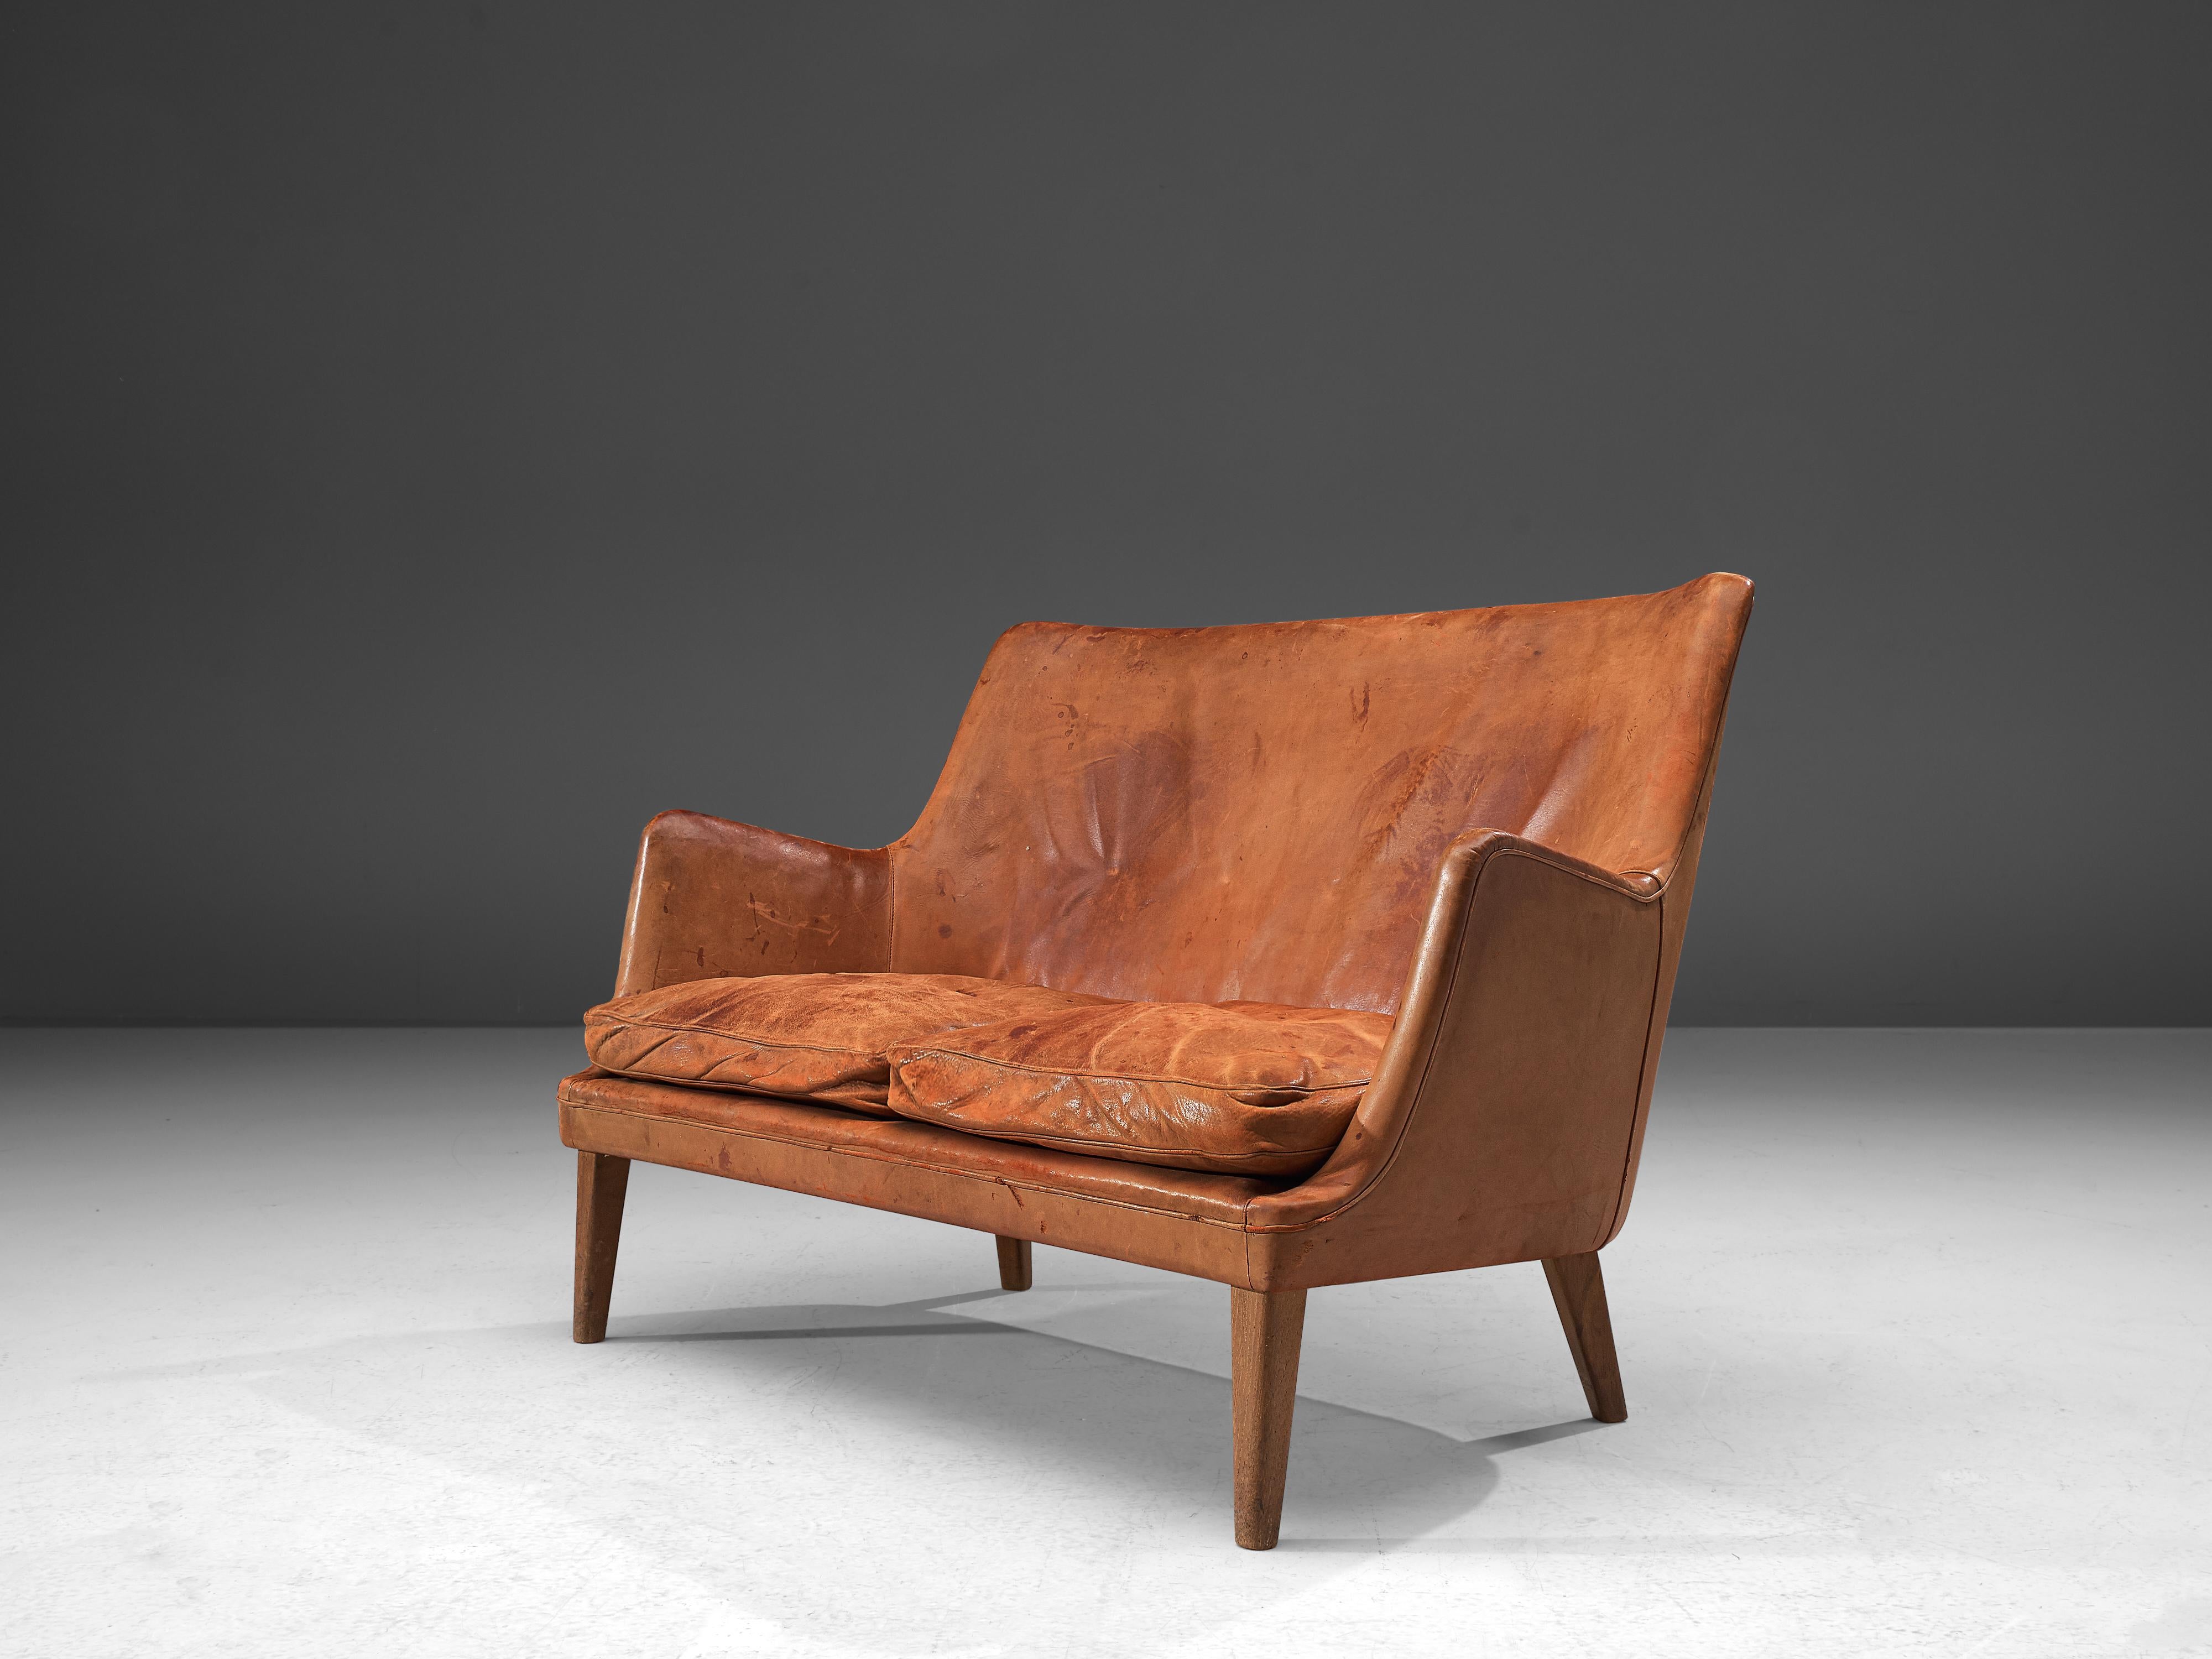 Arne Vodder for Ivan Schlechter, sofa, patinated leather and teak, Denmark, design 1953, manufactured late 1950s-1960s.

Elegant two-seat settee in admirable cognac leather and teak by Danish designer Arne Vodder and upholstered by master